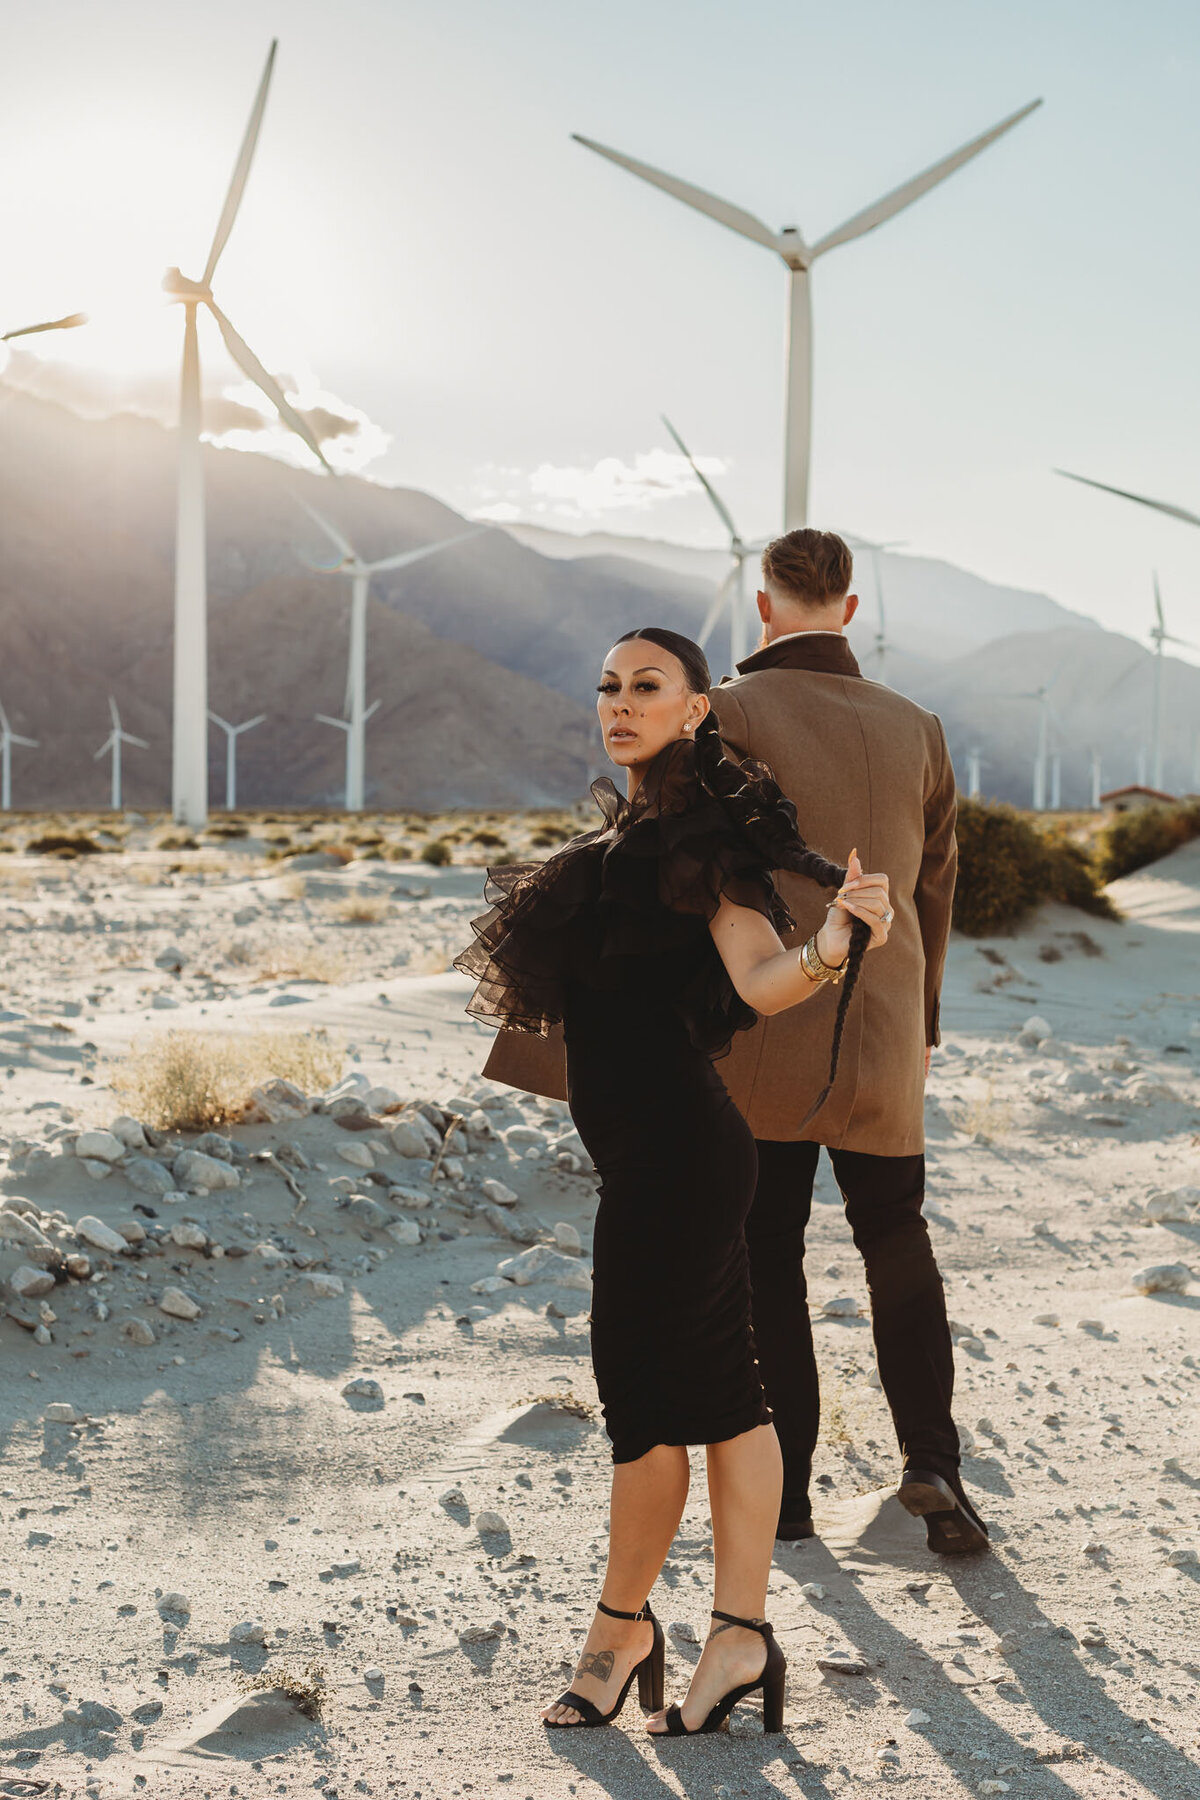 melissa-fe-chapman-photography-Palm-Springs-Windmills-Engagement-Session 1-5